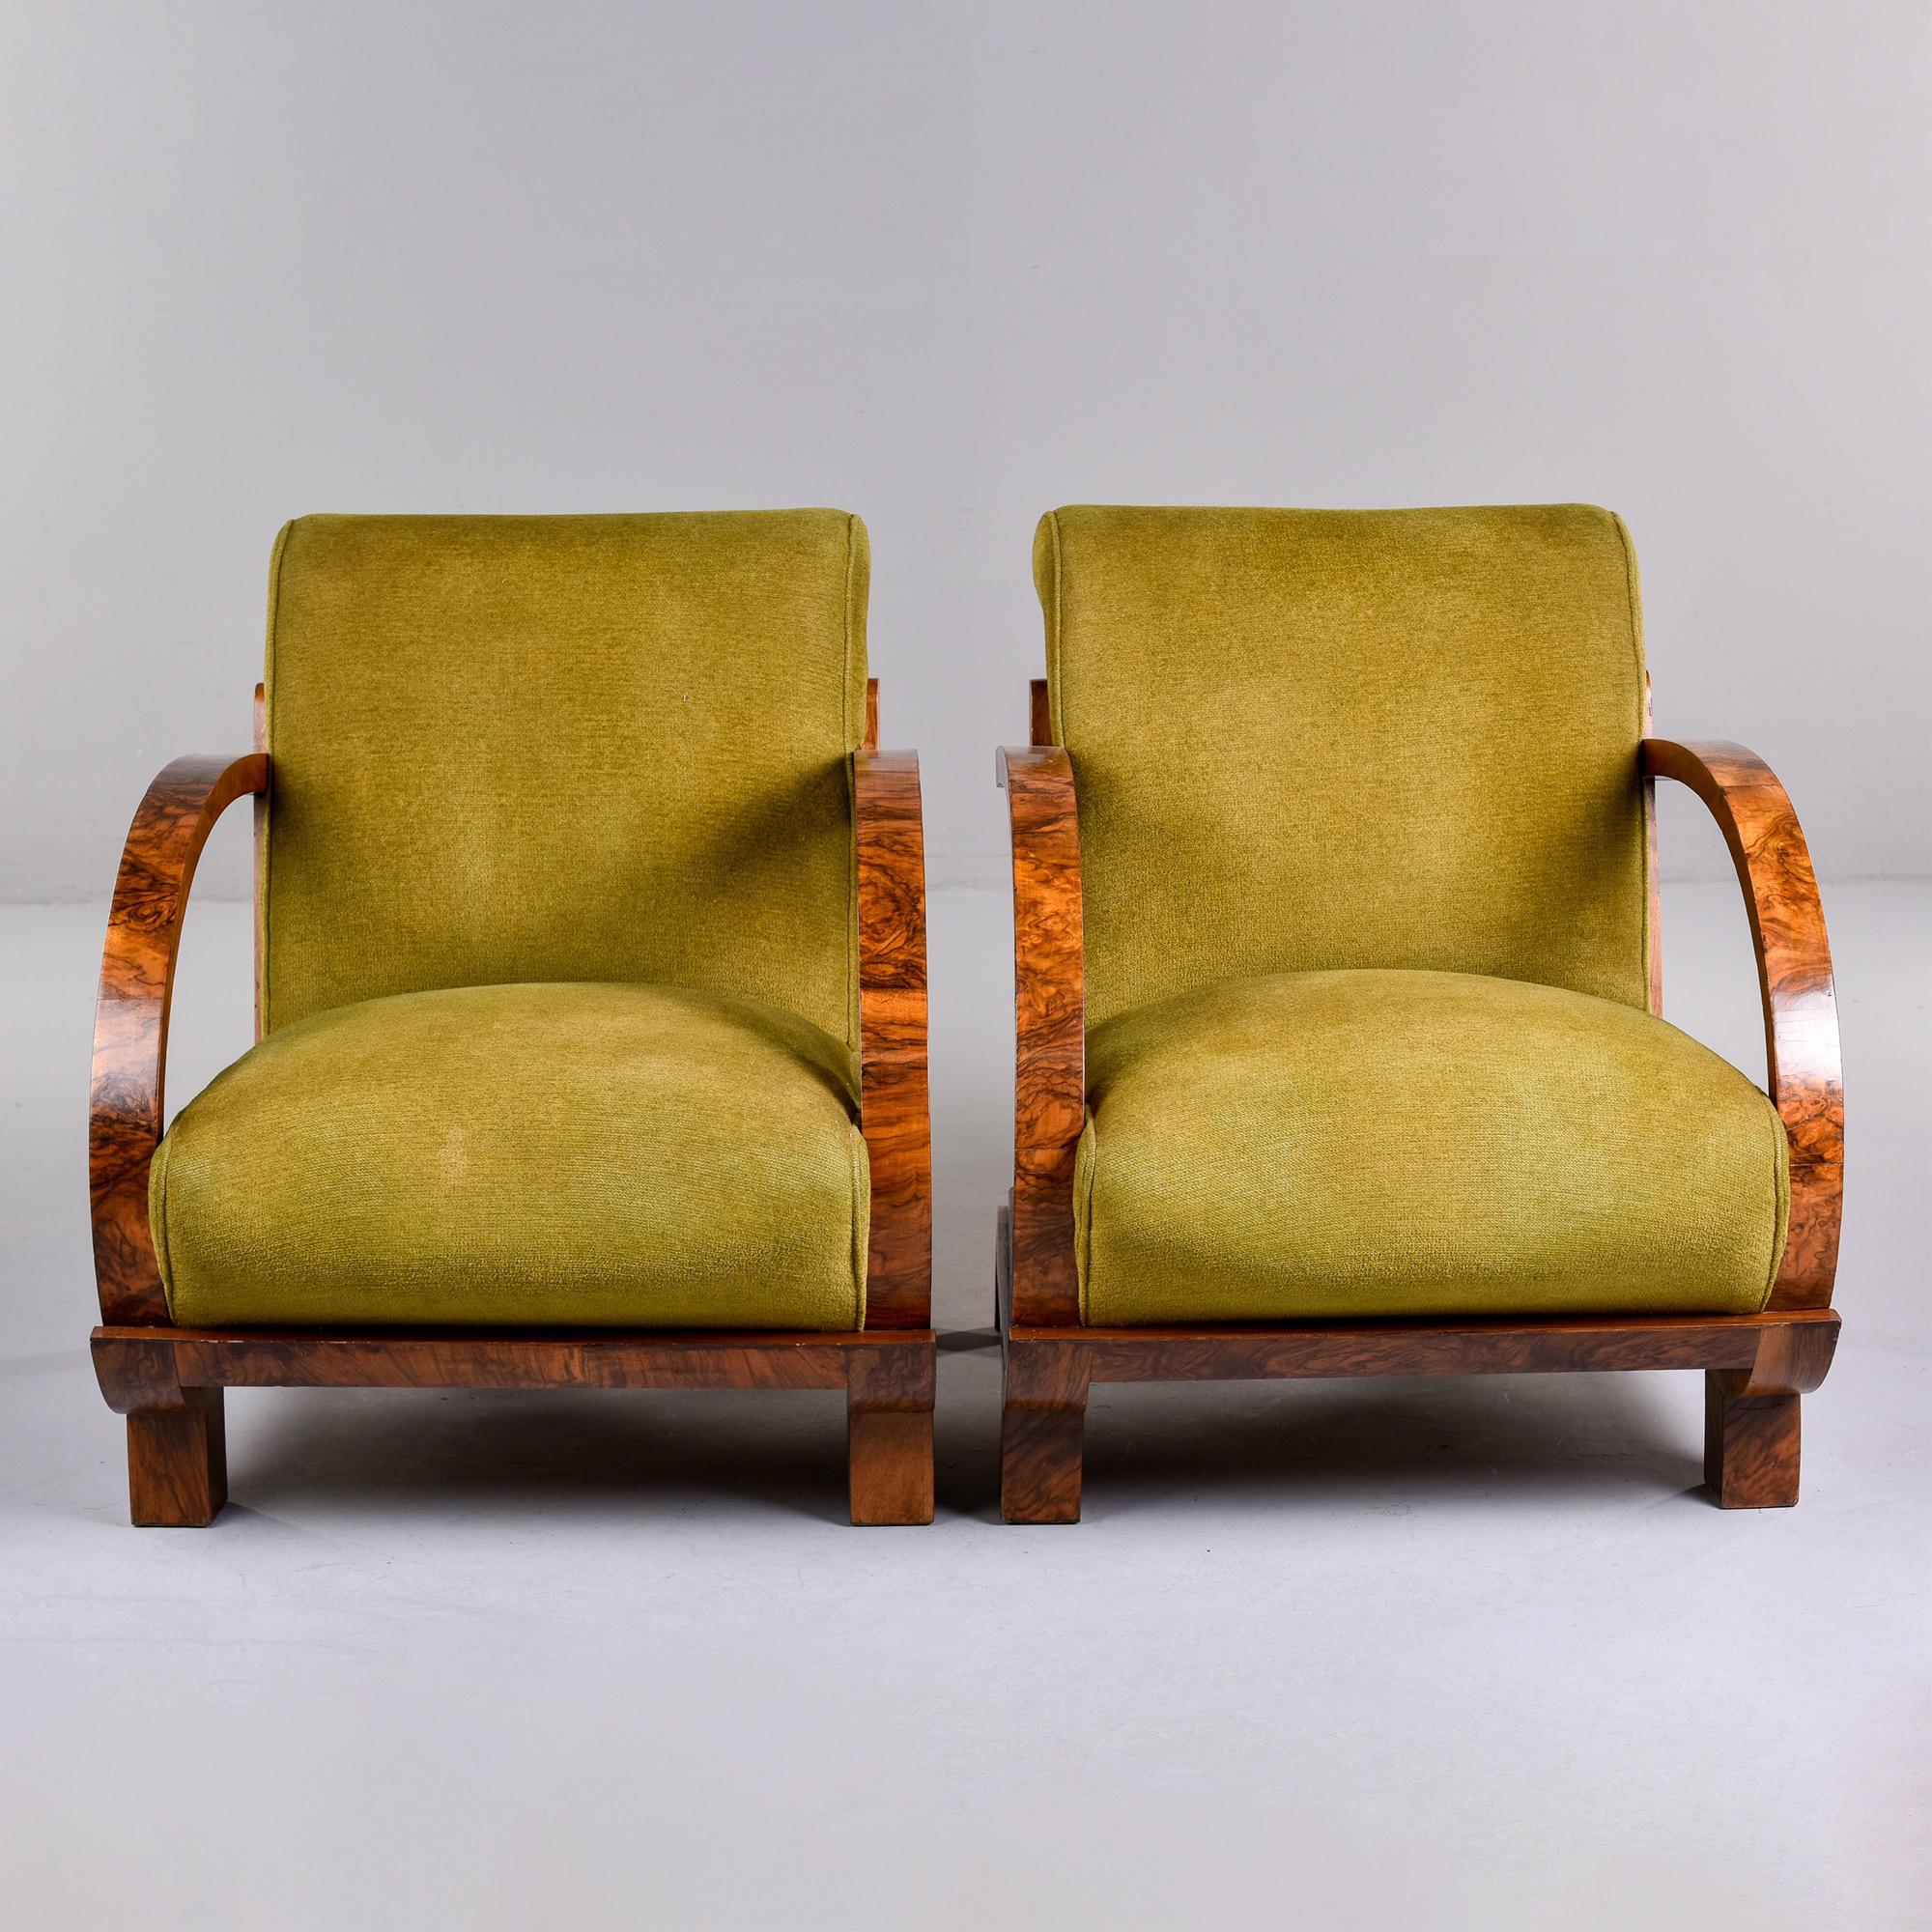 Veneer Pair French Art Deco Walnut Bentwood Armchairs with Original Upholstery